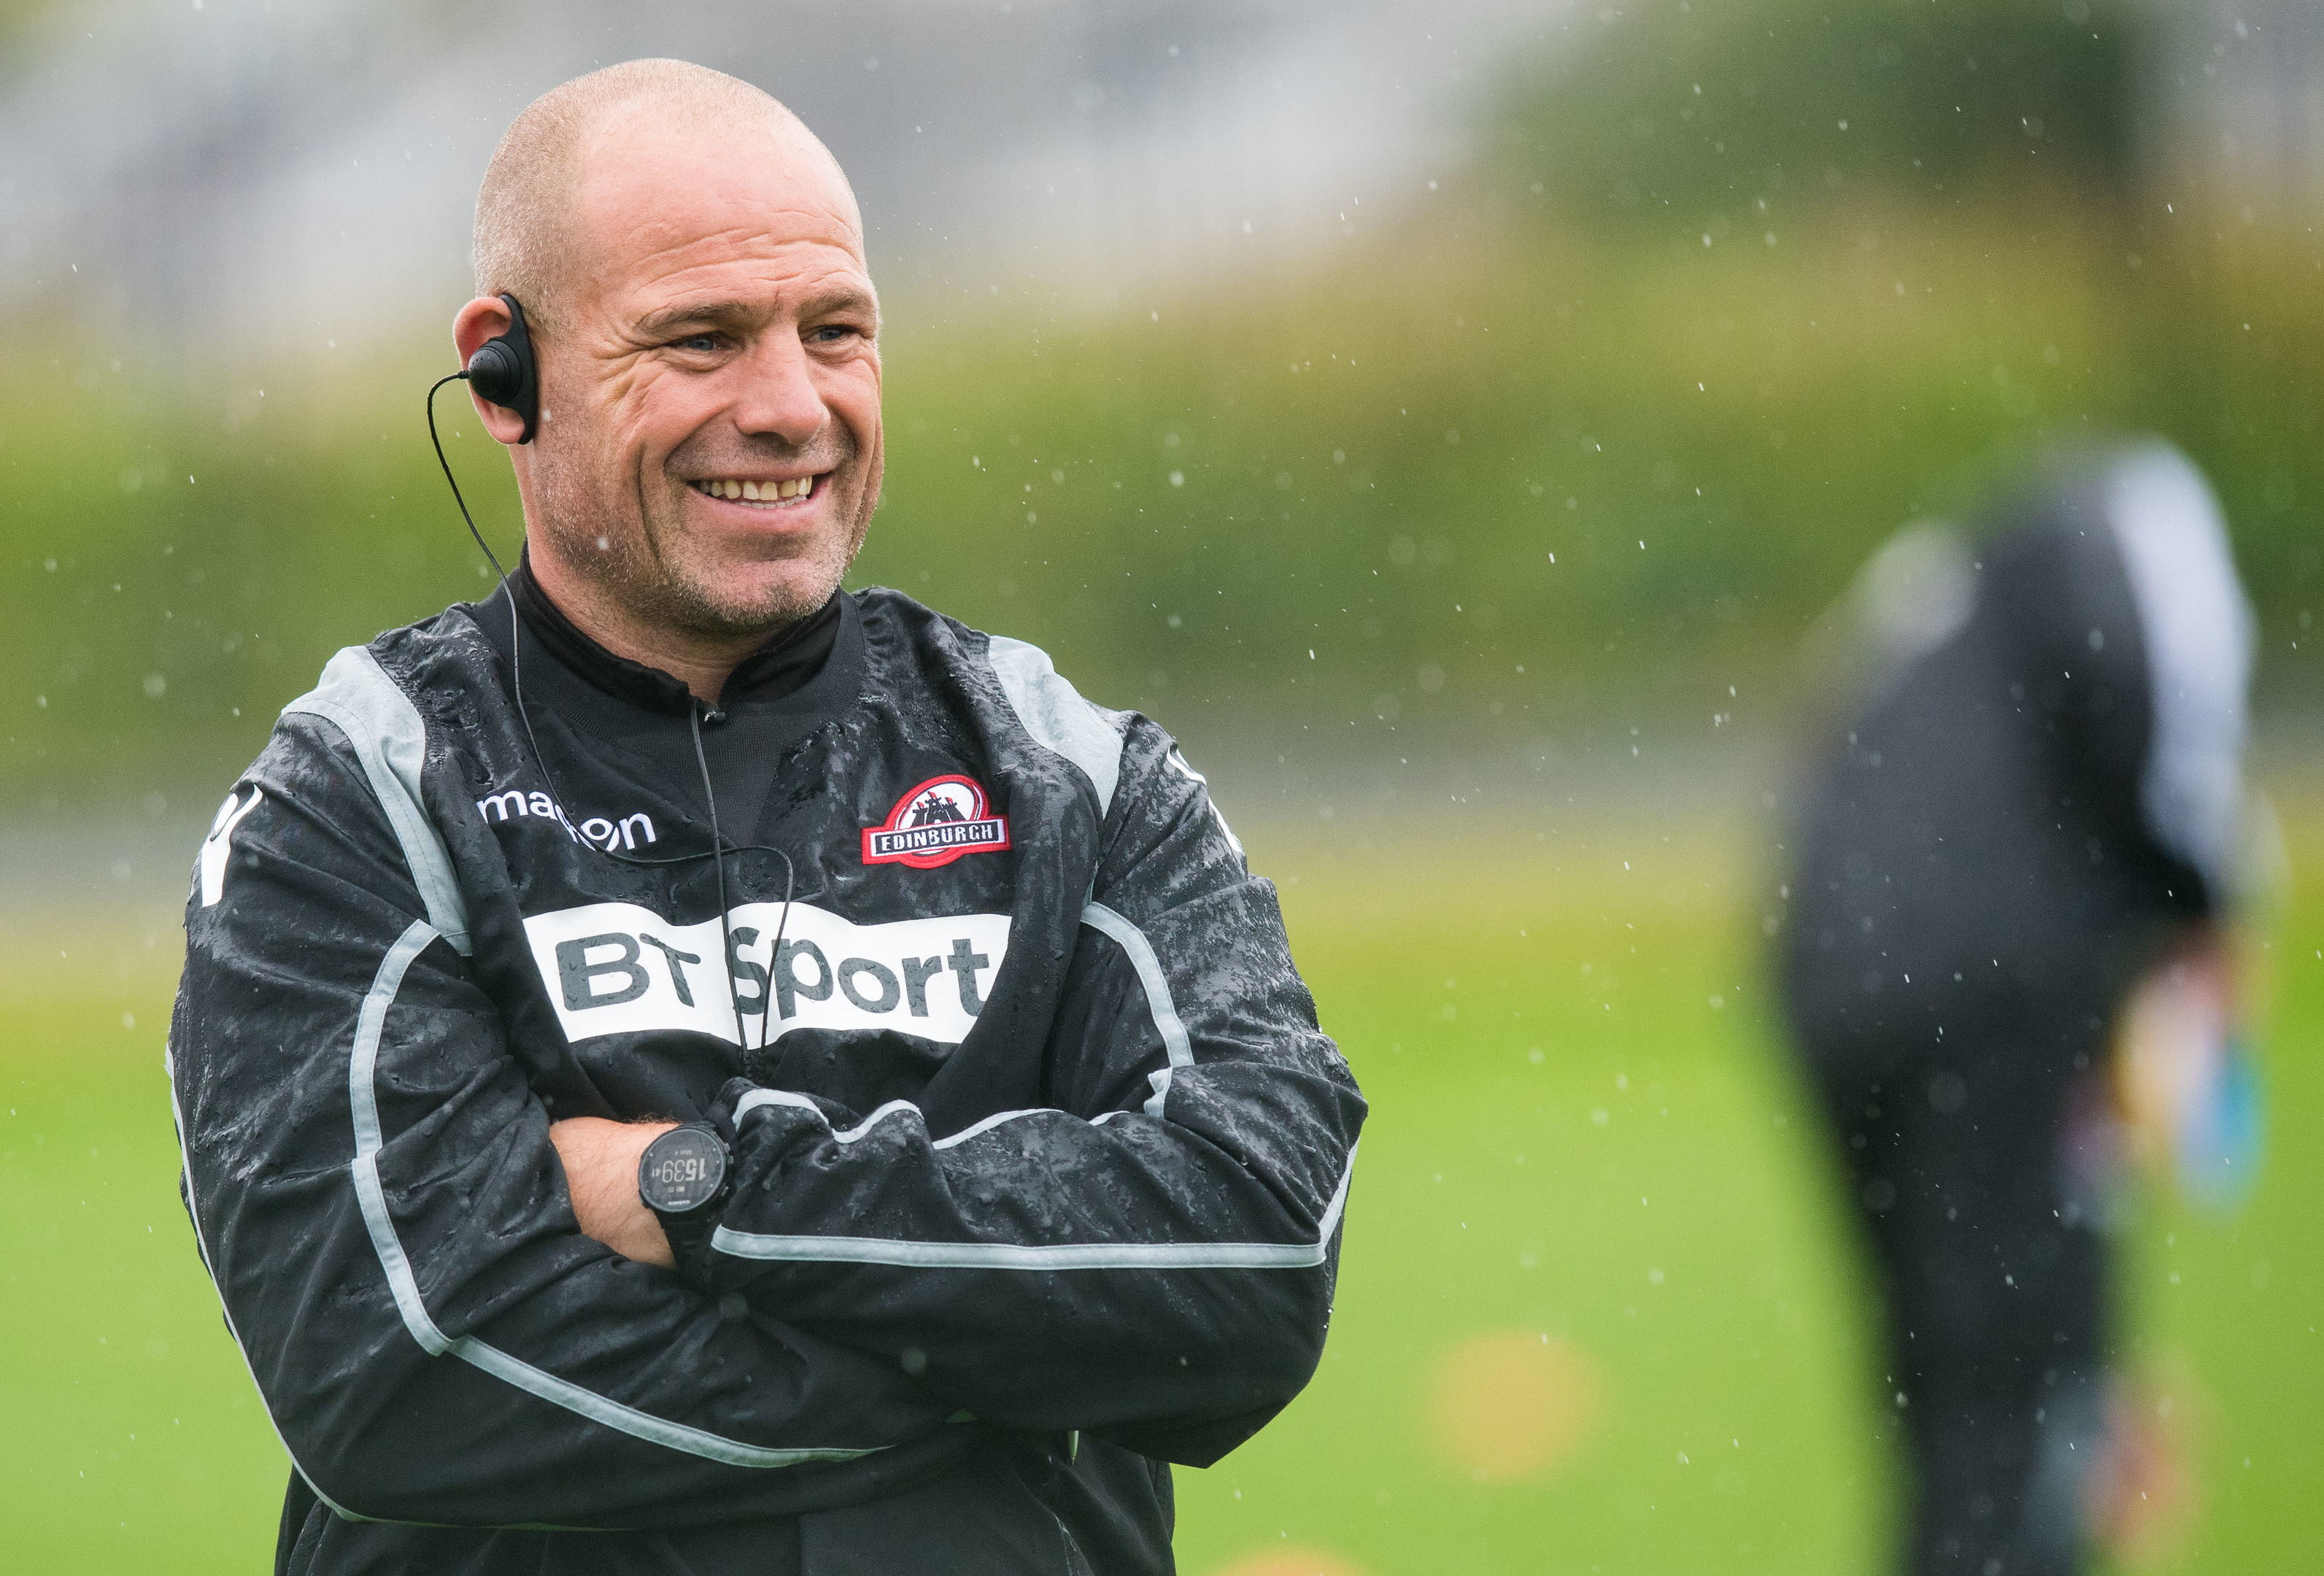 Richard Cockerill has signed a two-year extension to his current contract with Edinburgh Rugby.